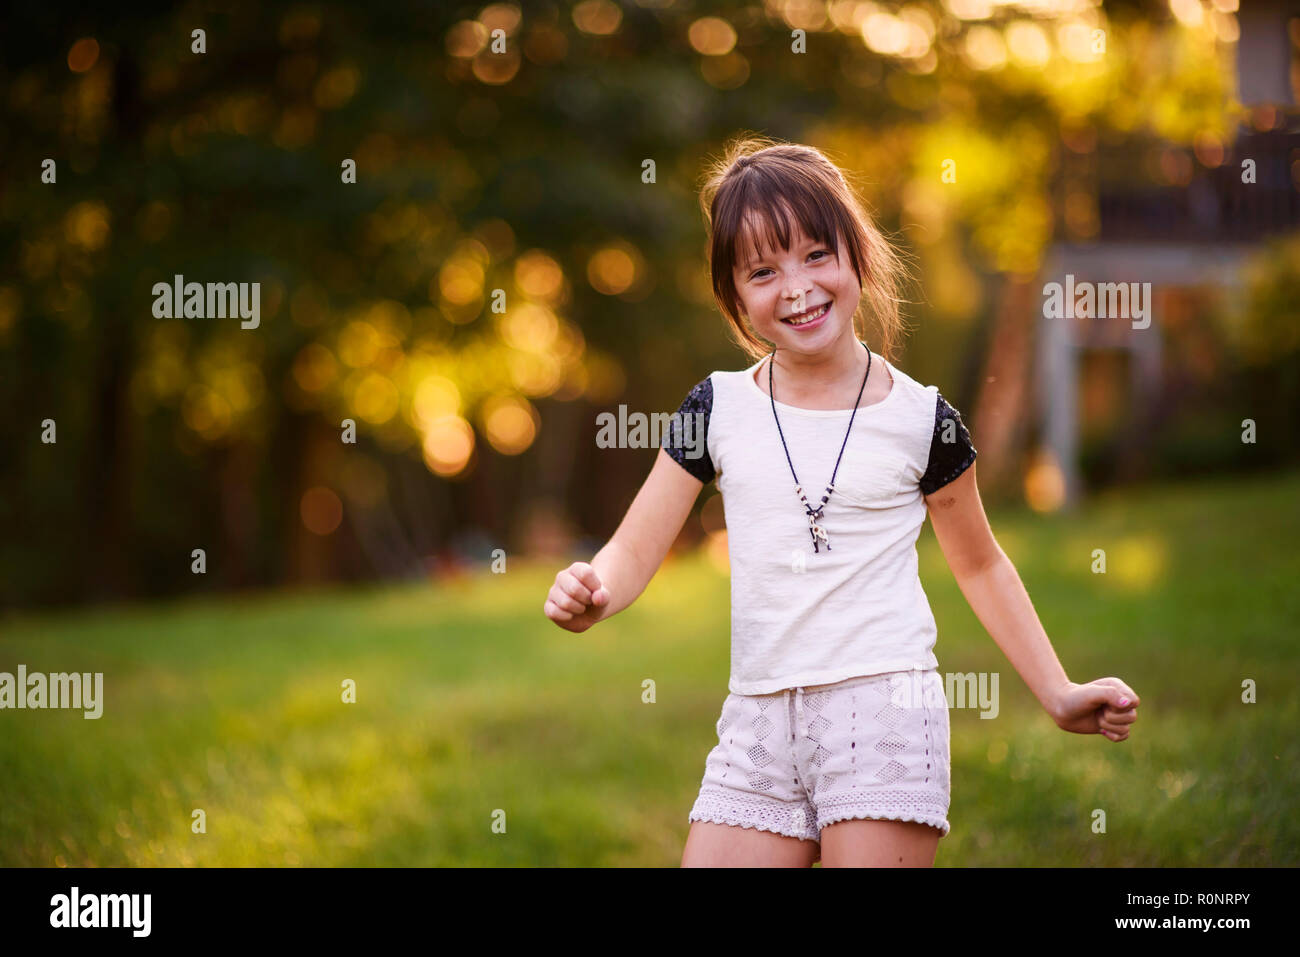 Portrait of a smiling girl dancing in the park Stock Photo